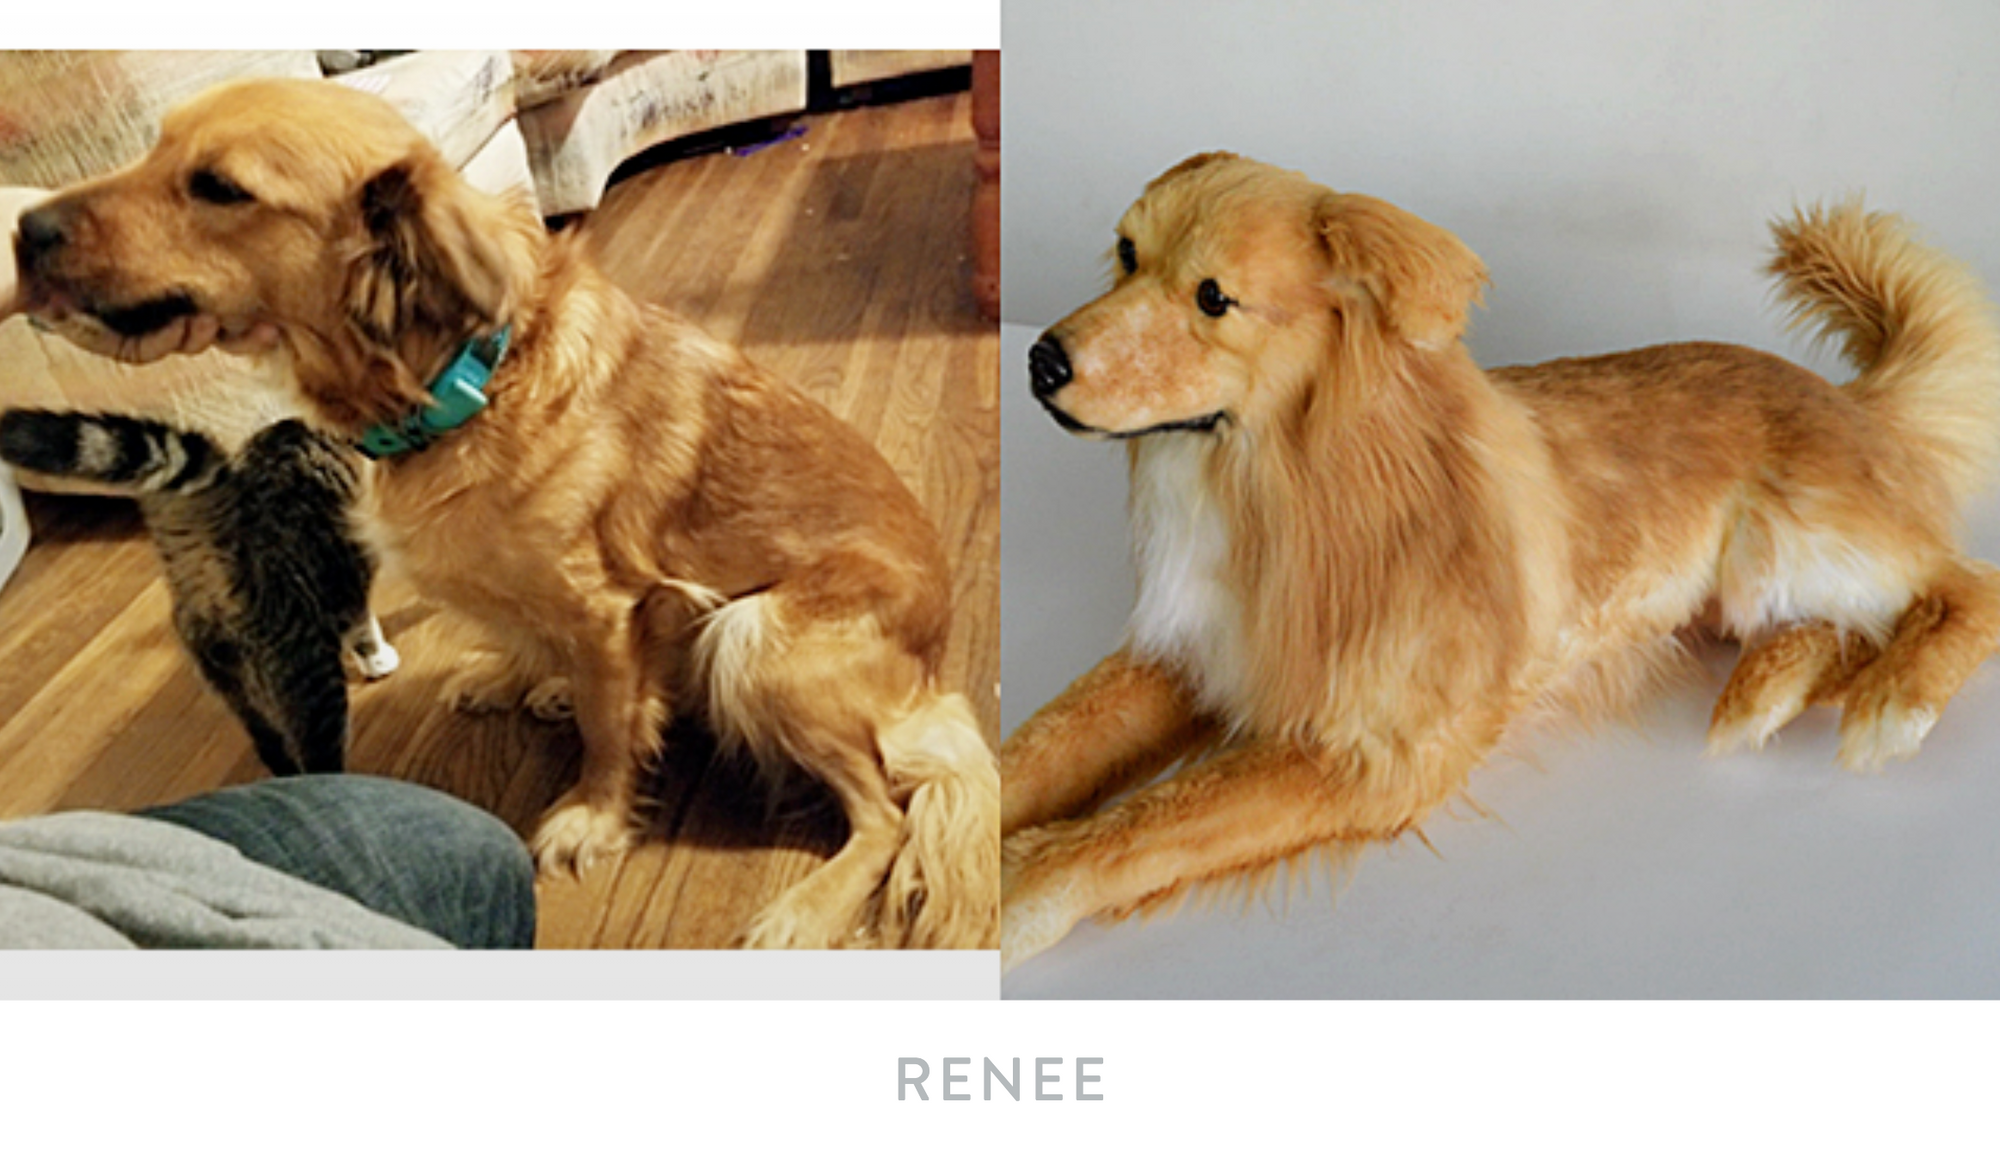 Side by side of dog Renee and their Cuddle Clone